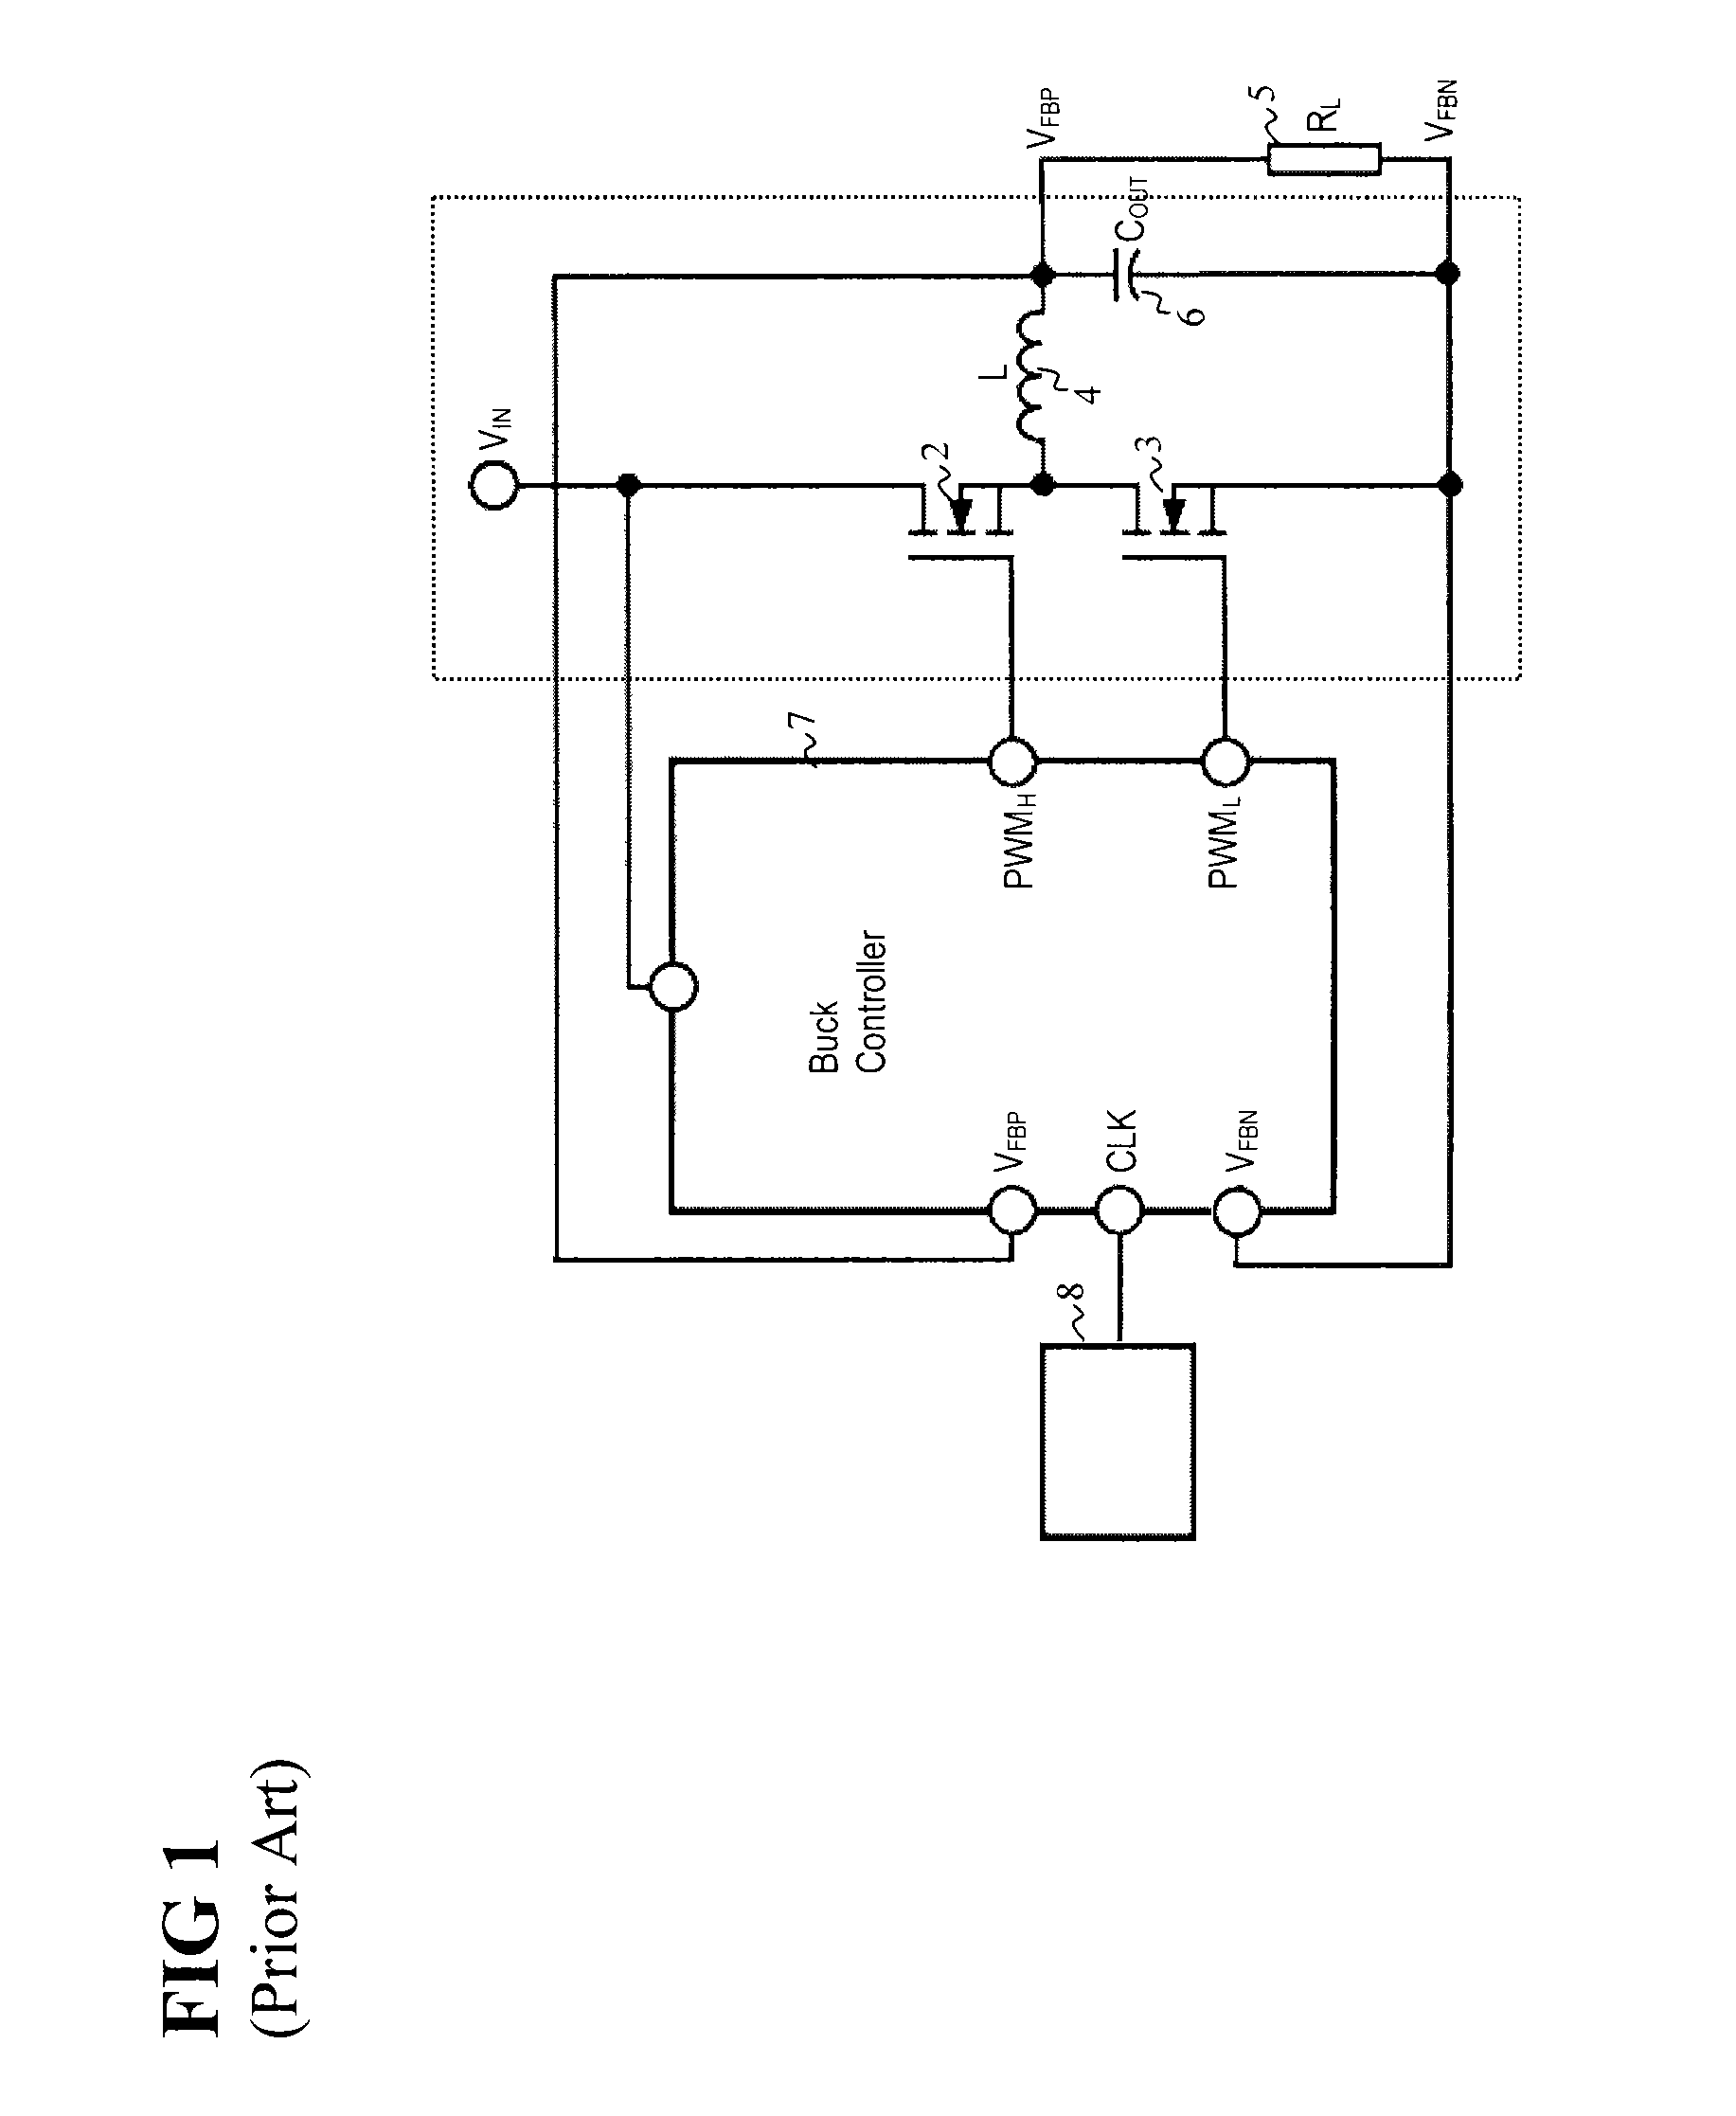 Method for the closed-loop control of a buck converter and arrangement for implementing the method